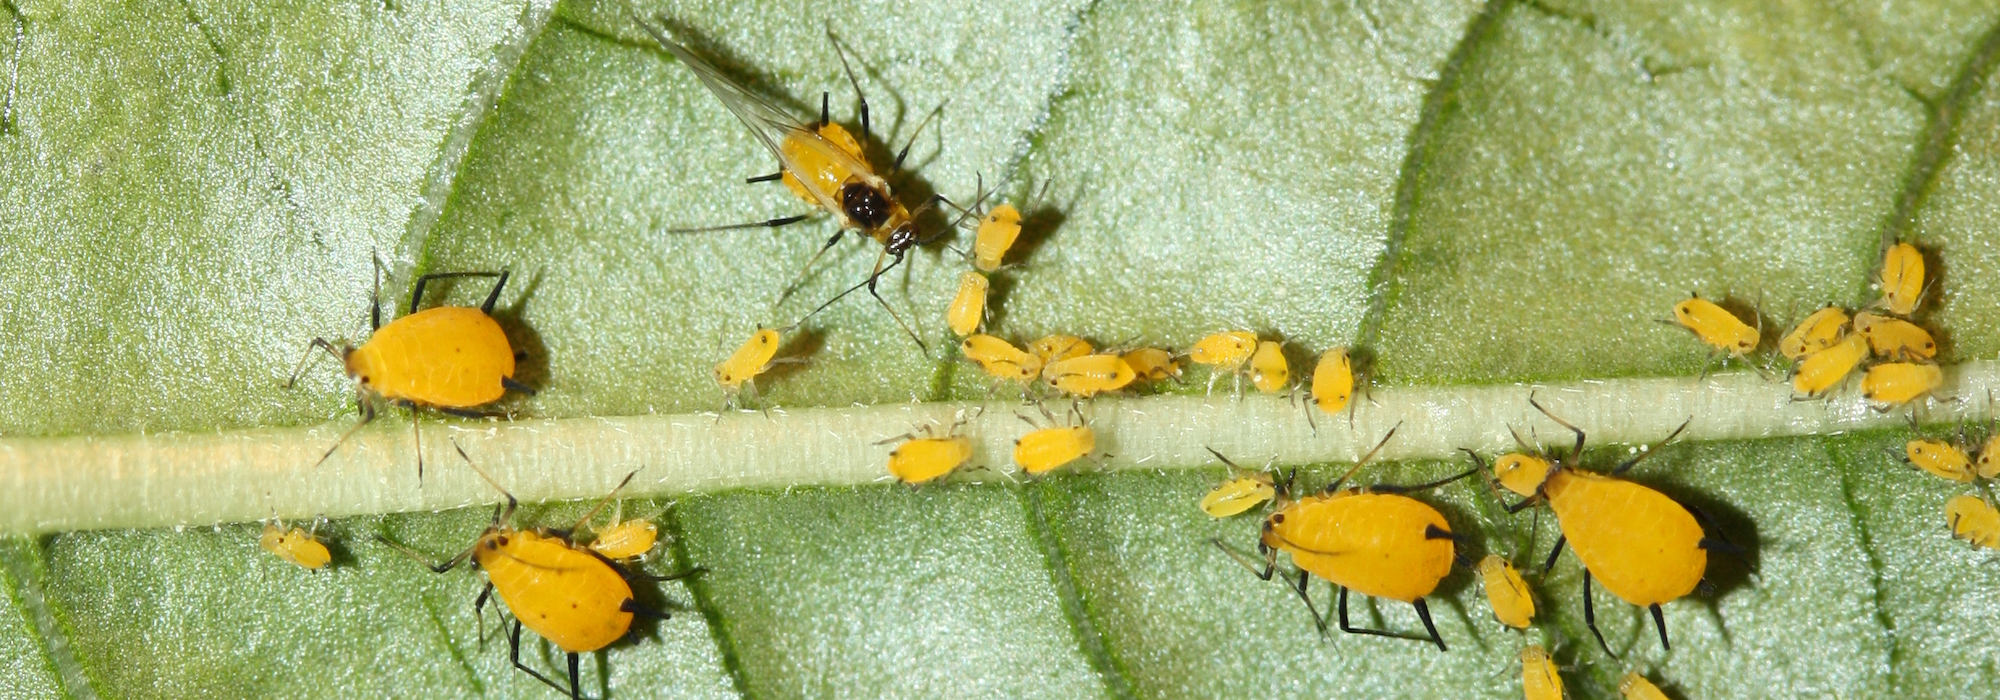 A. nerii aphids